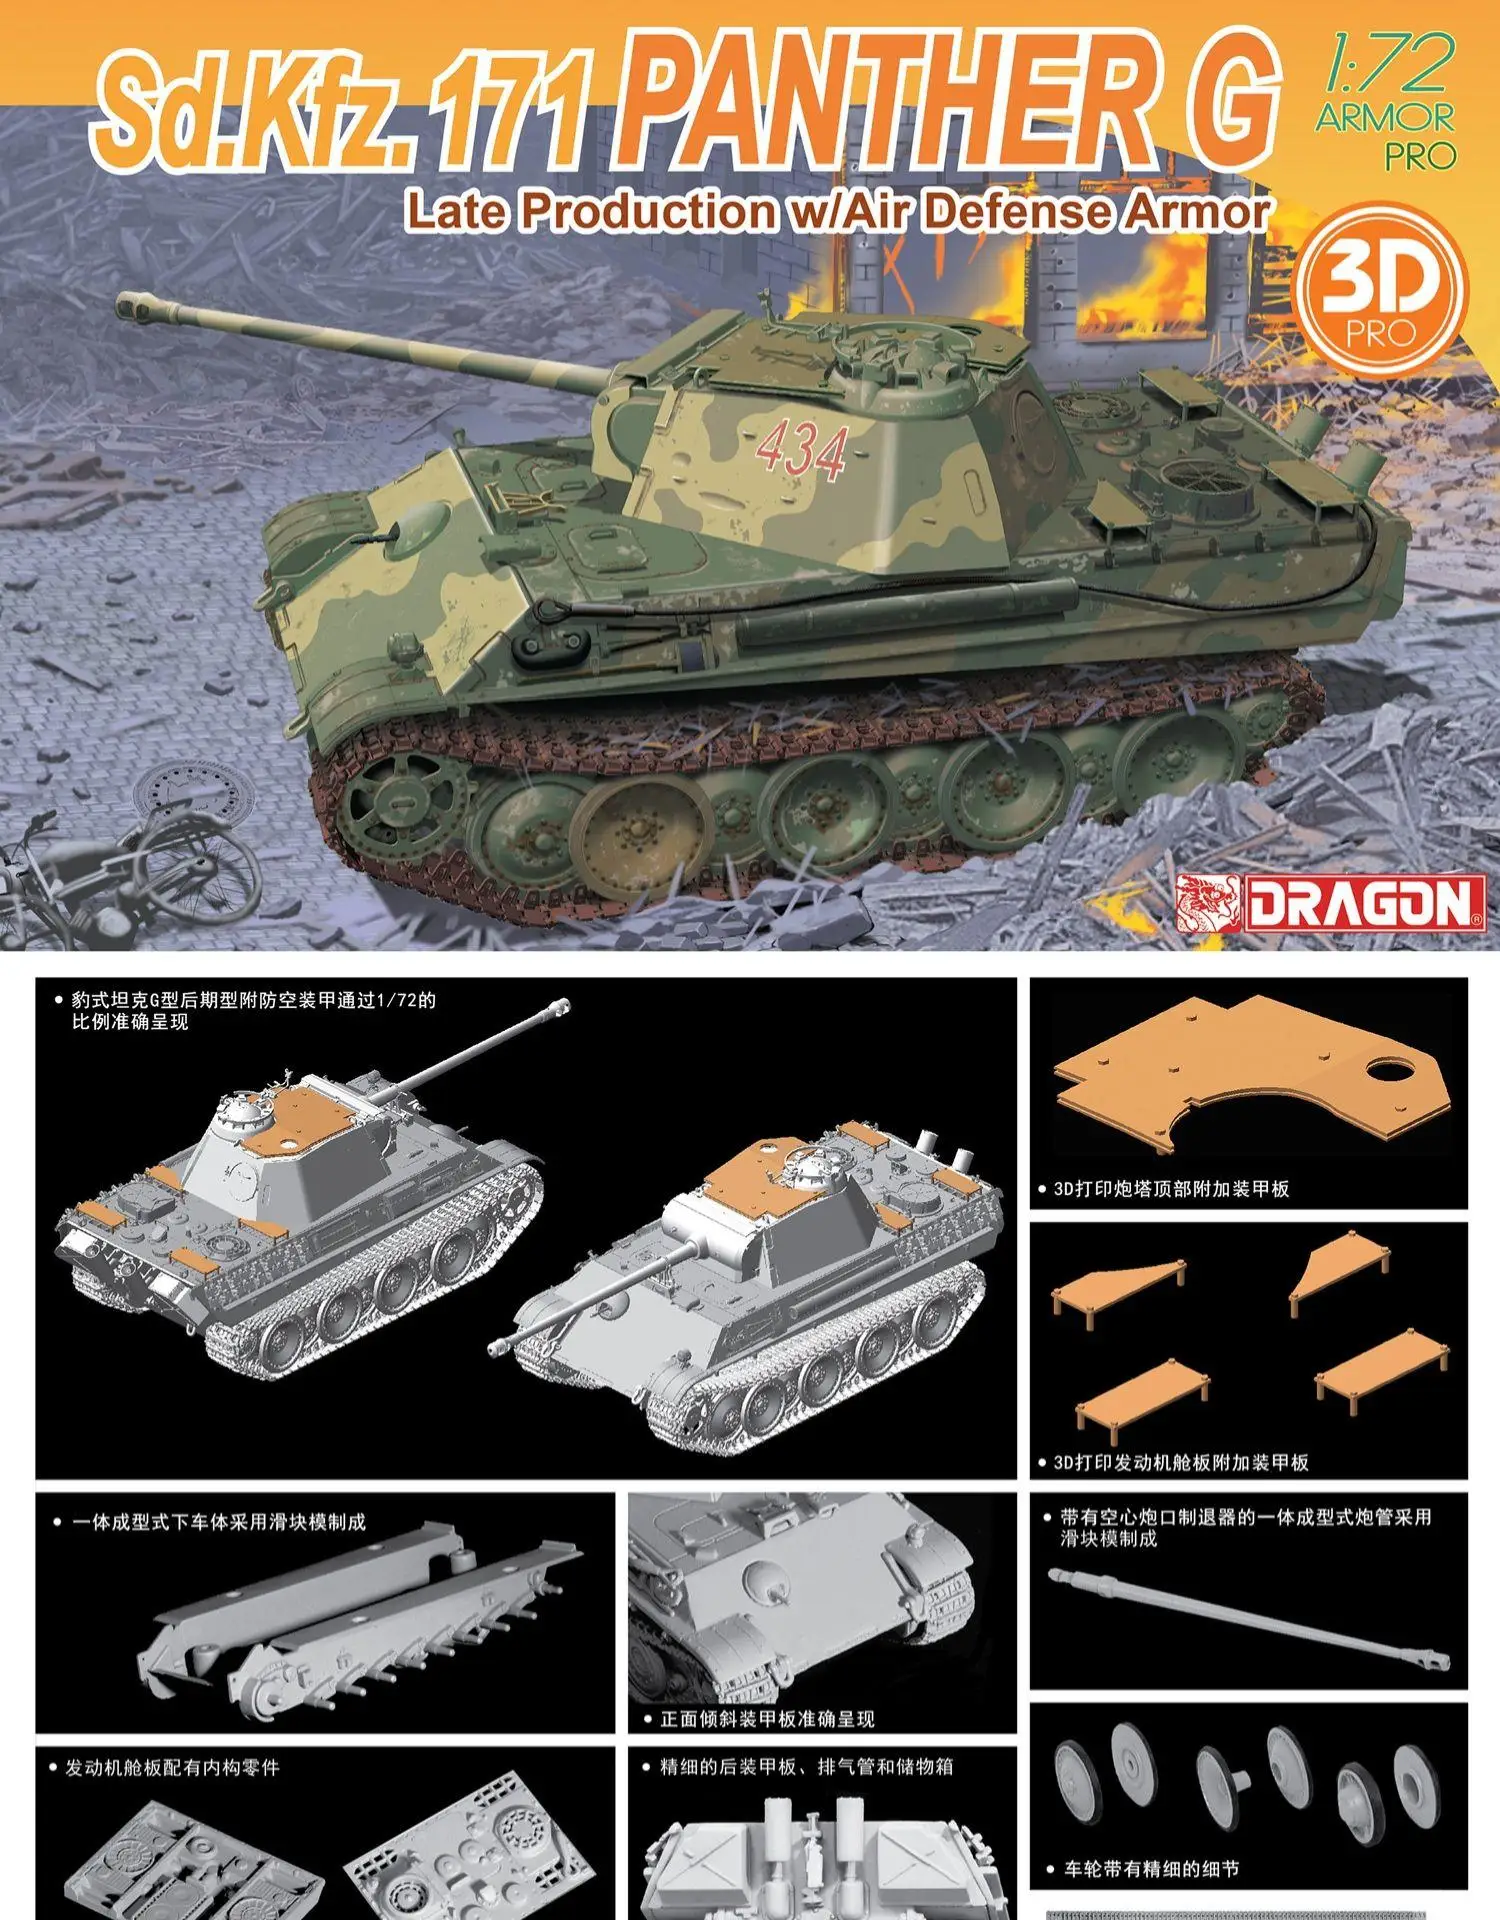 

DRAGON 7696 1/72 Scale Sd.Kfz.171 Panther G Late Production w/Air Defense Armor model kit